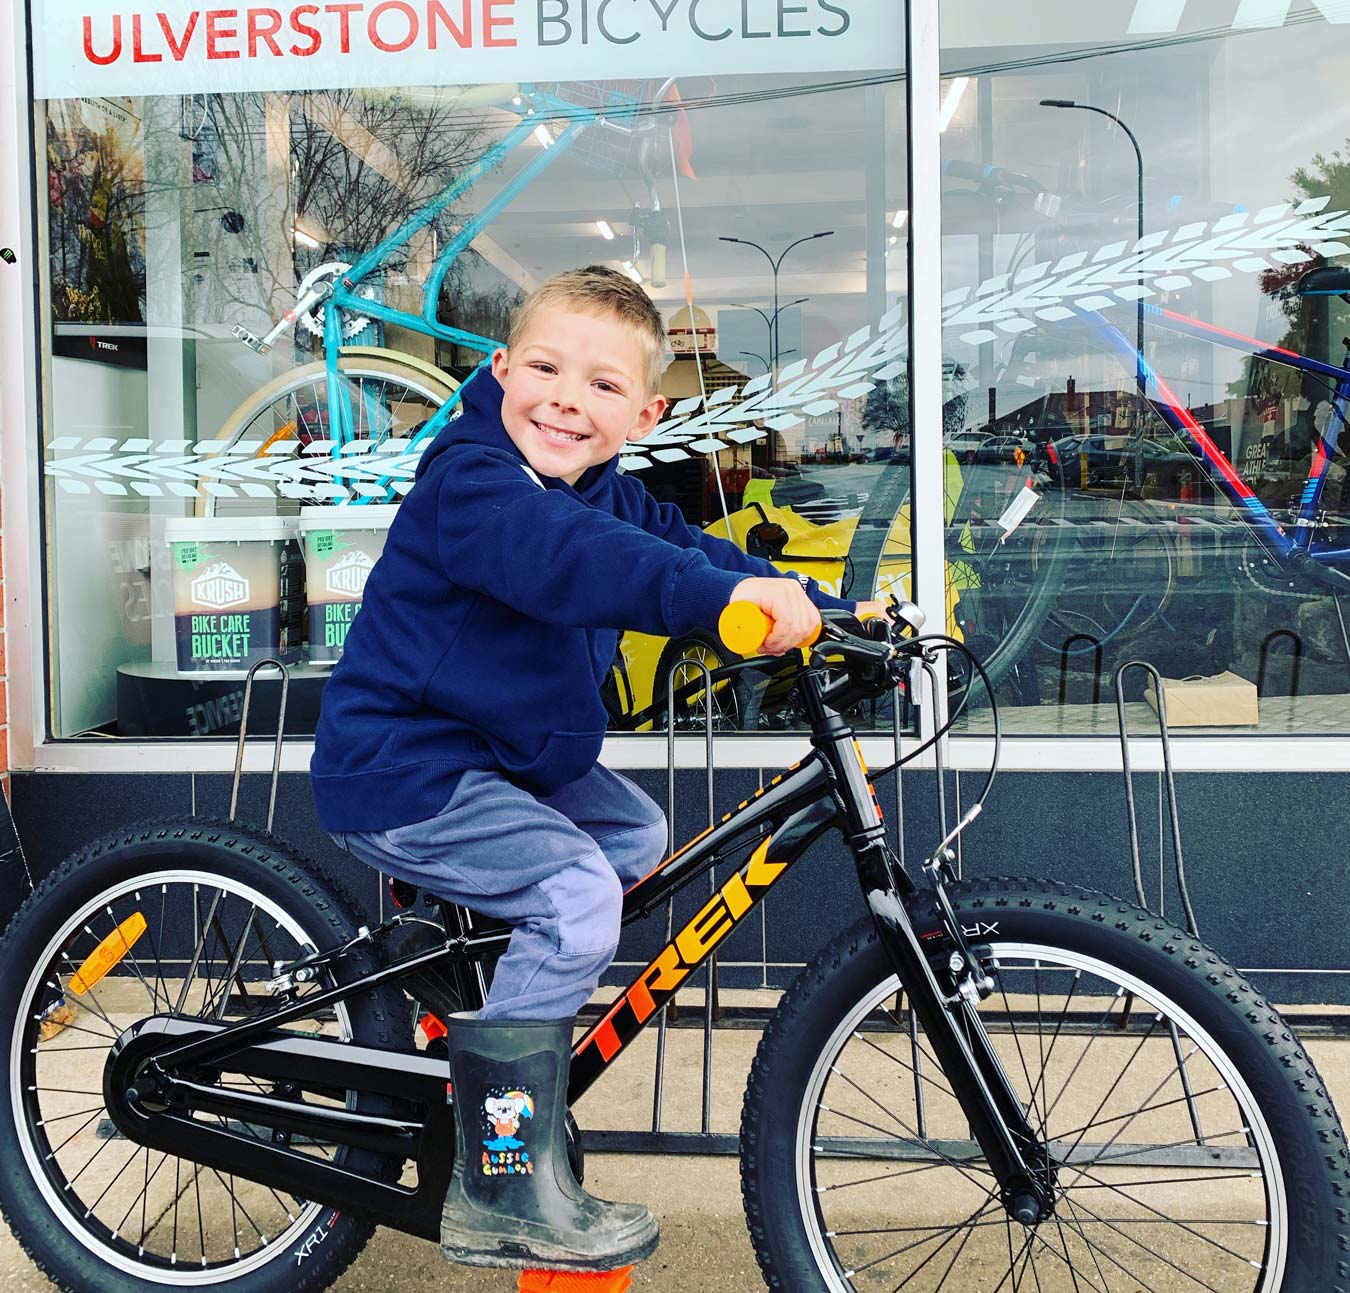 ULVERSTONE BICYCLES